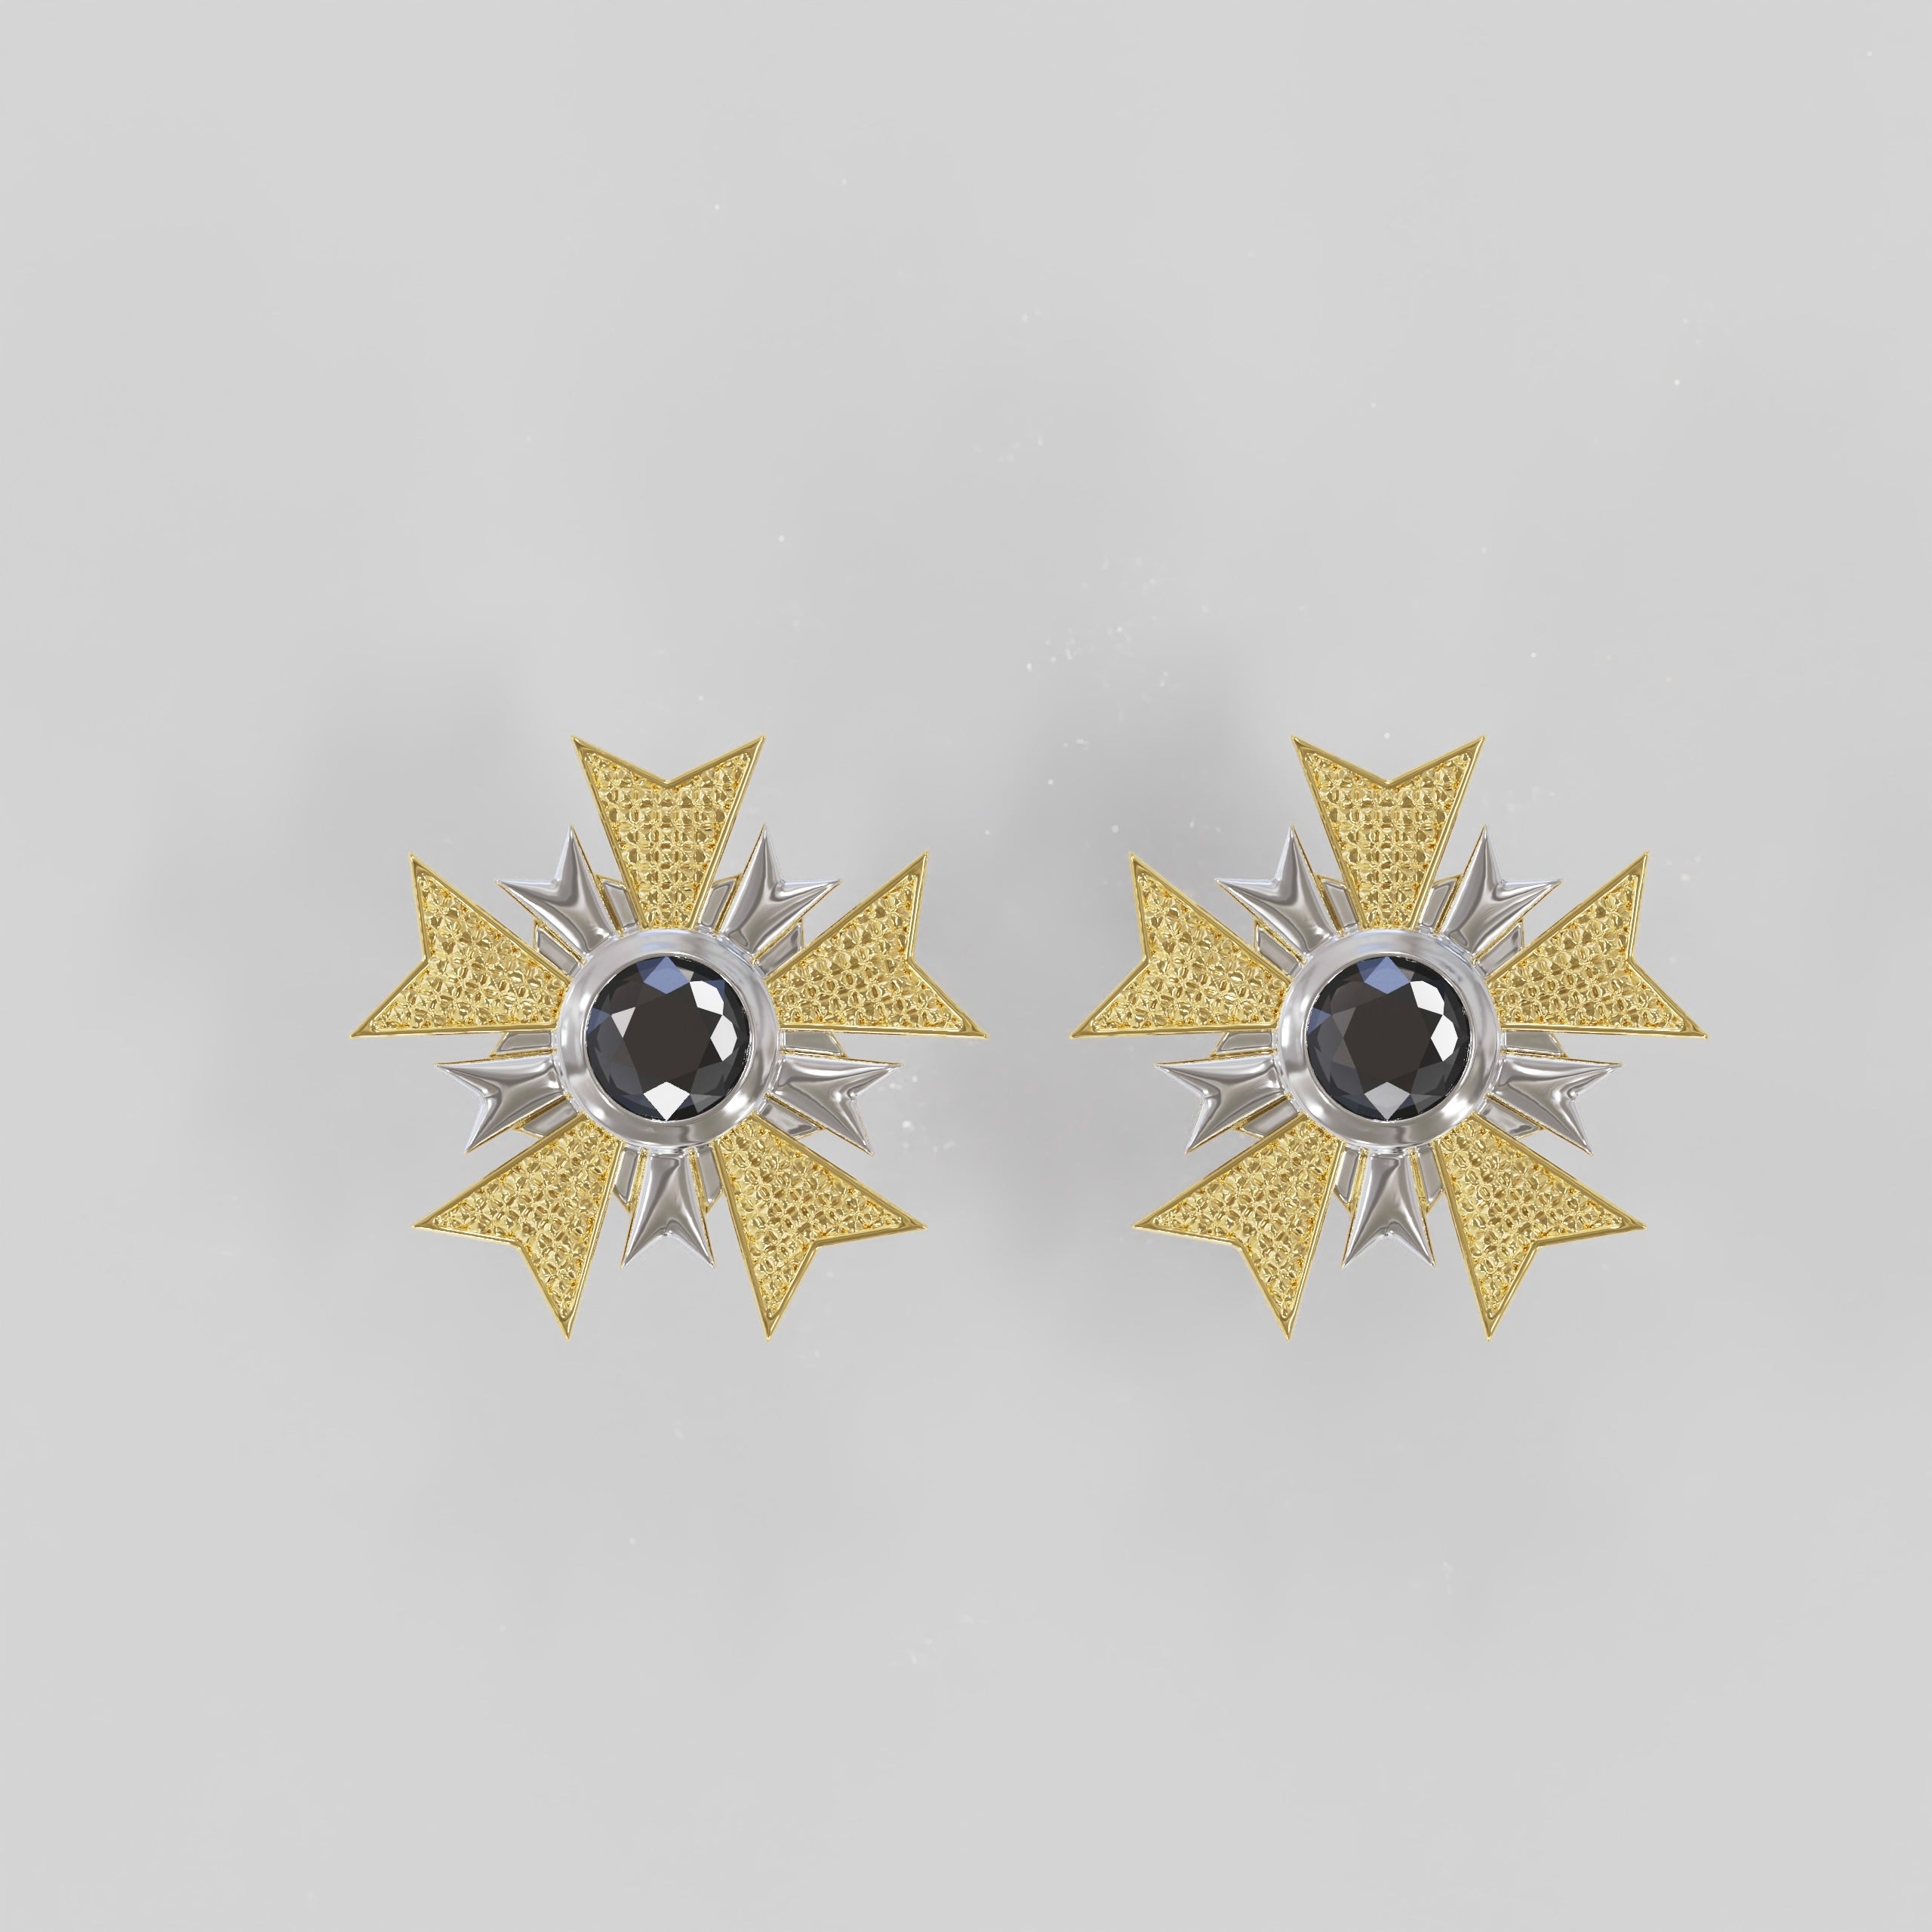 THE RICHES EAR STUDS